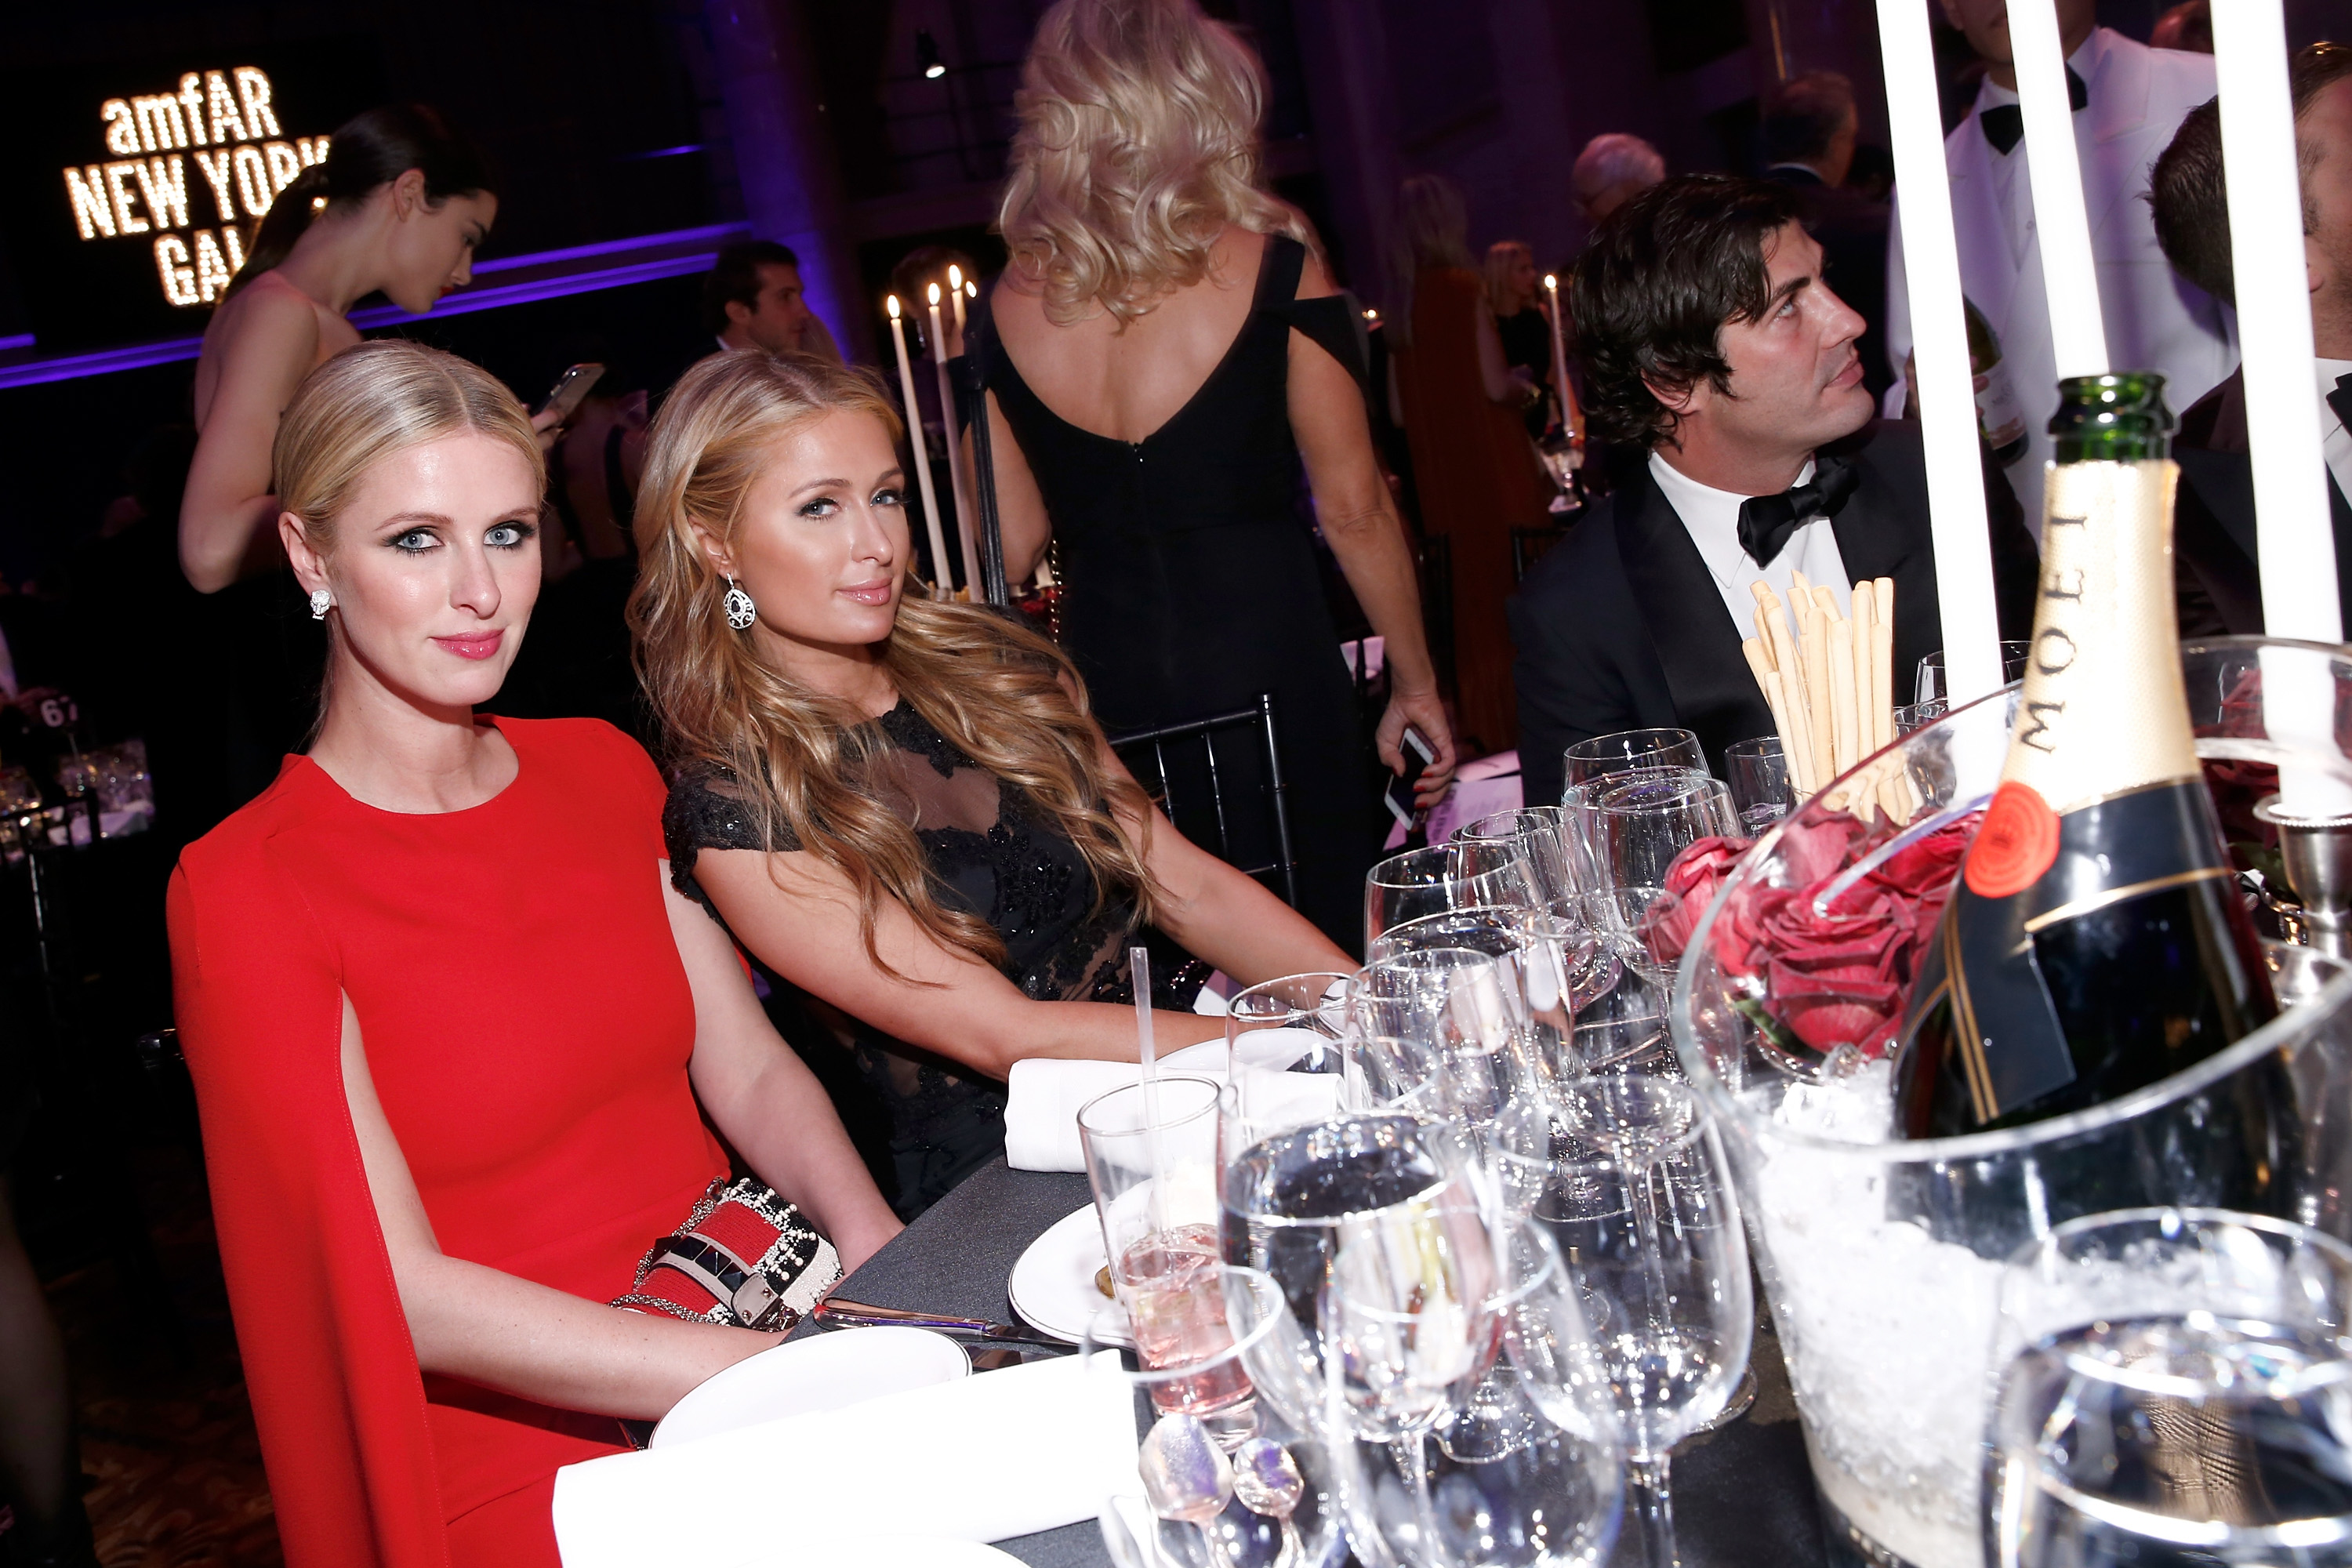 Nicky Hilton (L) and Paris Hilton attend the Moet & Chandon toast to the amfAR Gala at Cipriani Wall Street